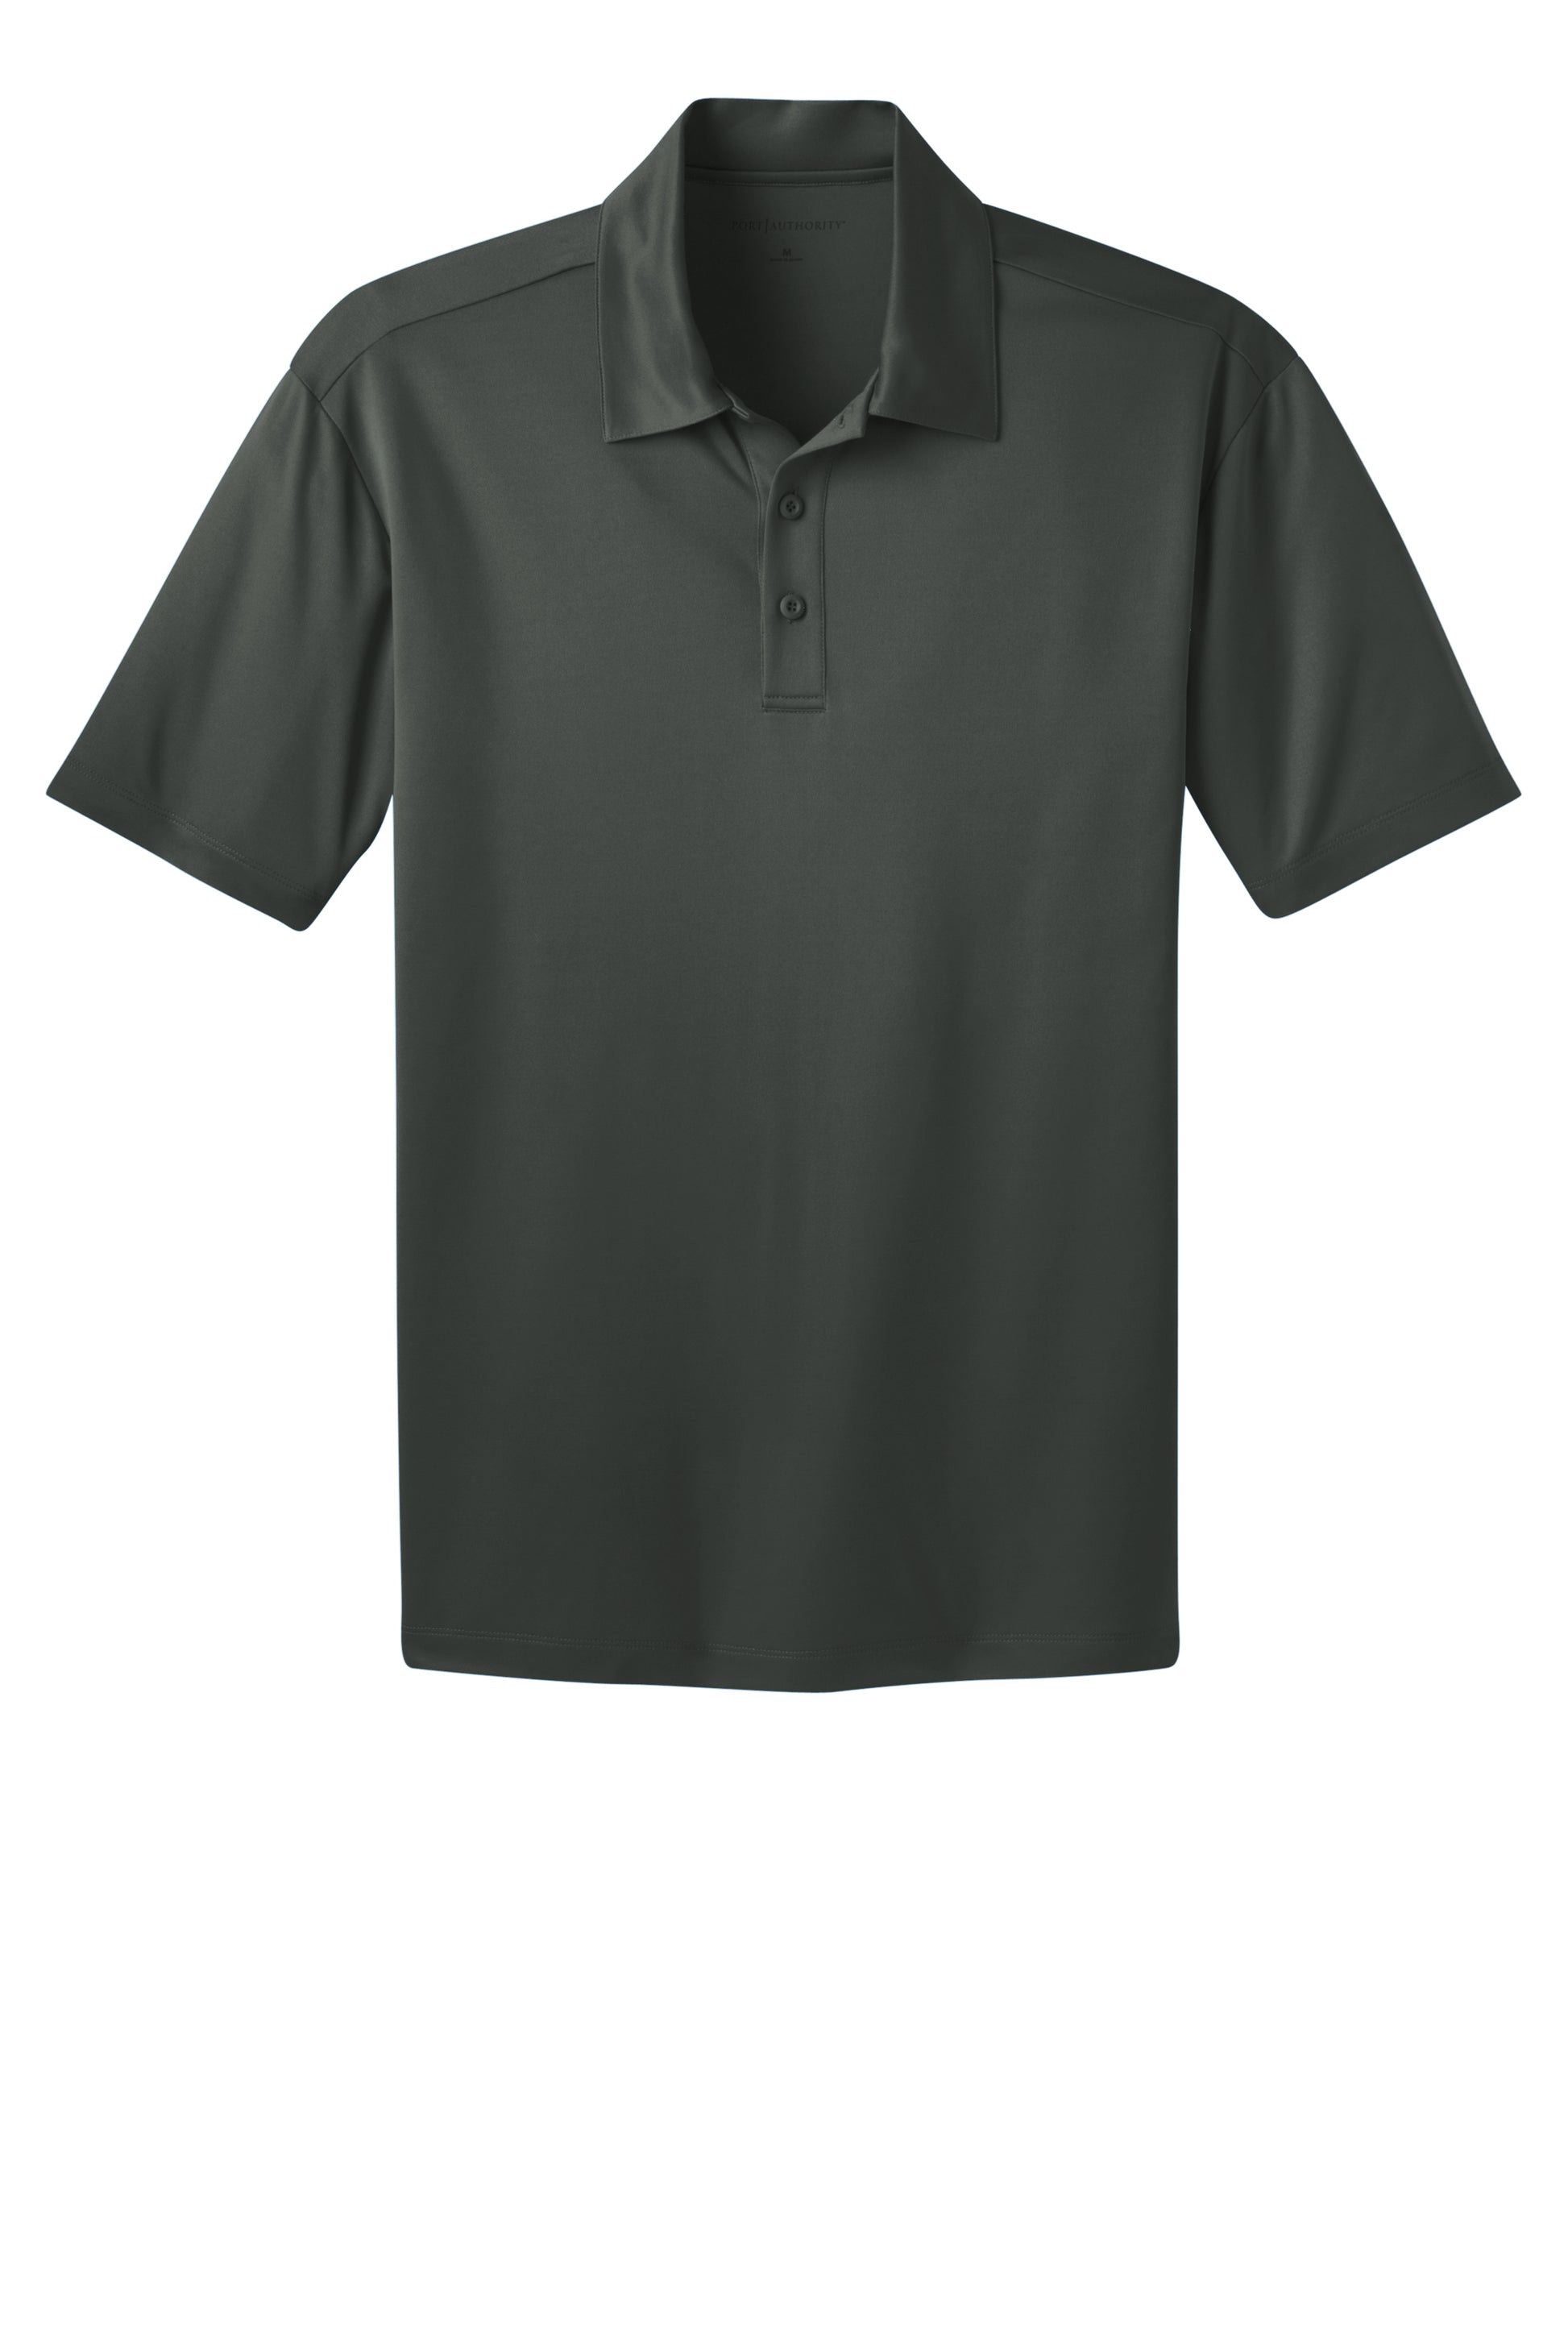 port authority silk touch polo steel grey